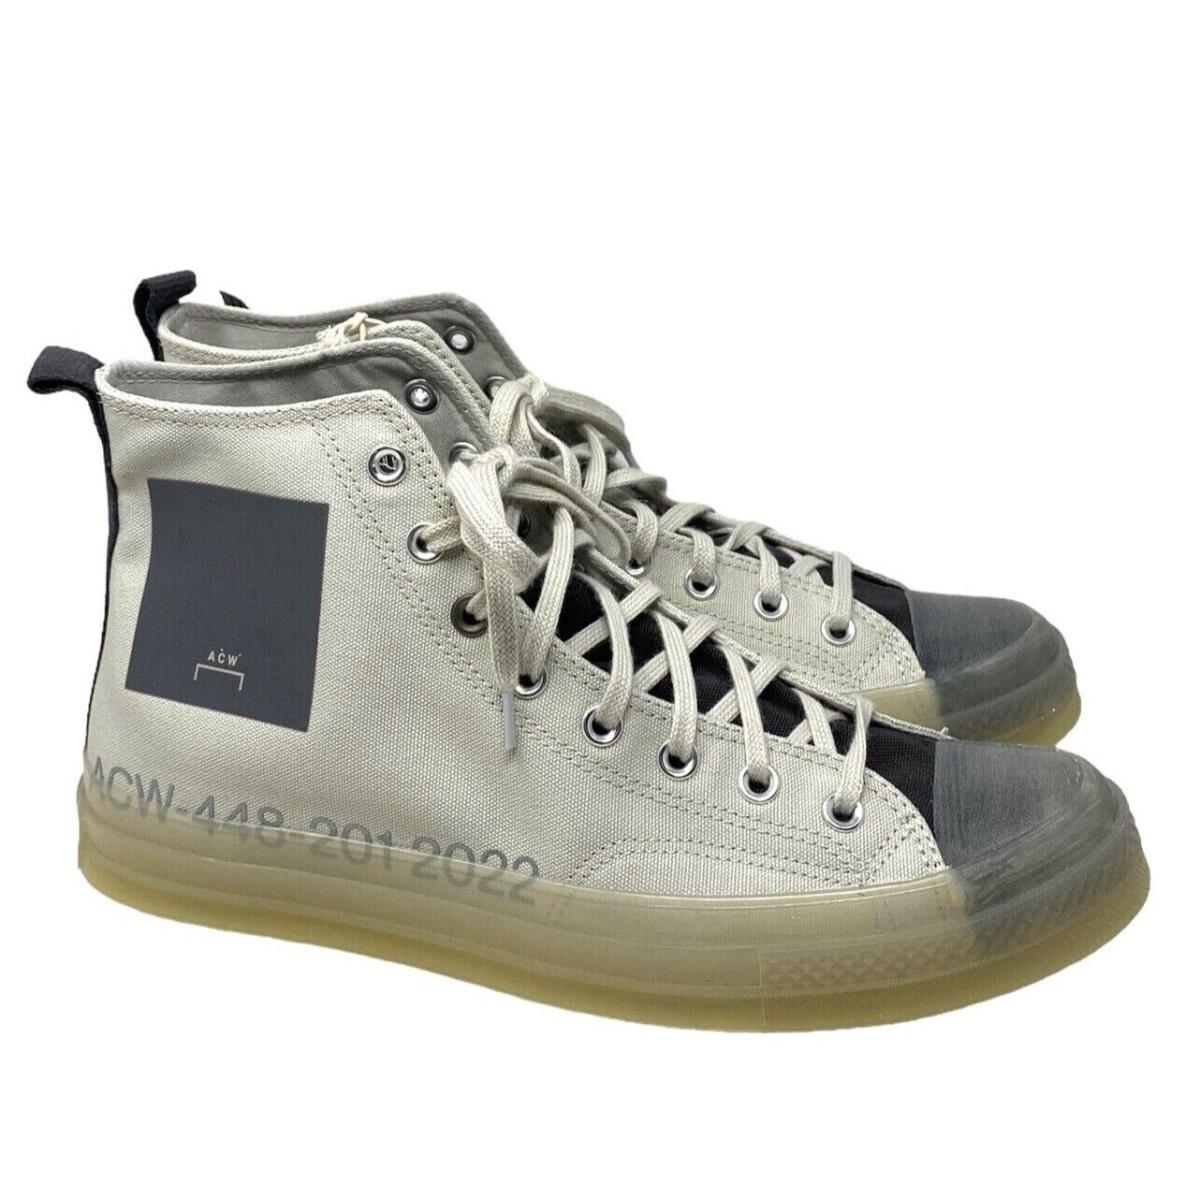 Converse x A-cold-wall Chuck 70 Shoes High Top Women Size Sneakers Skate A02276C